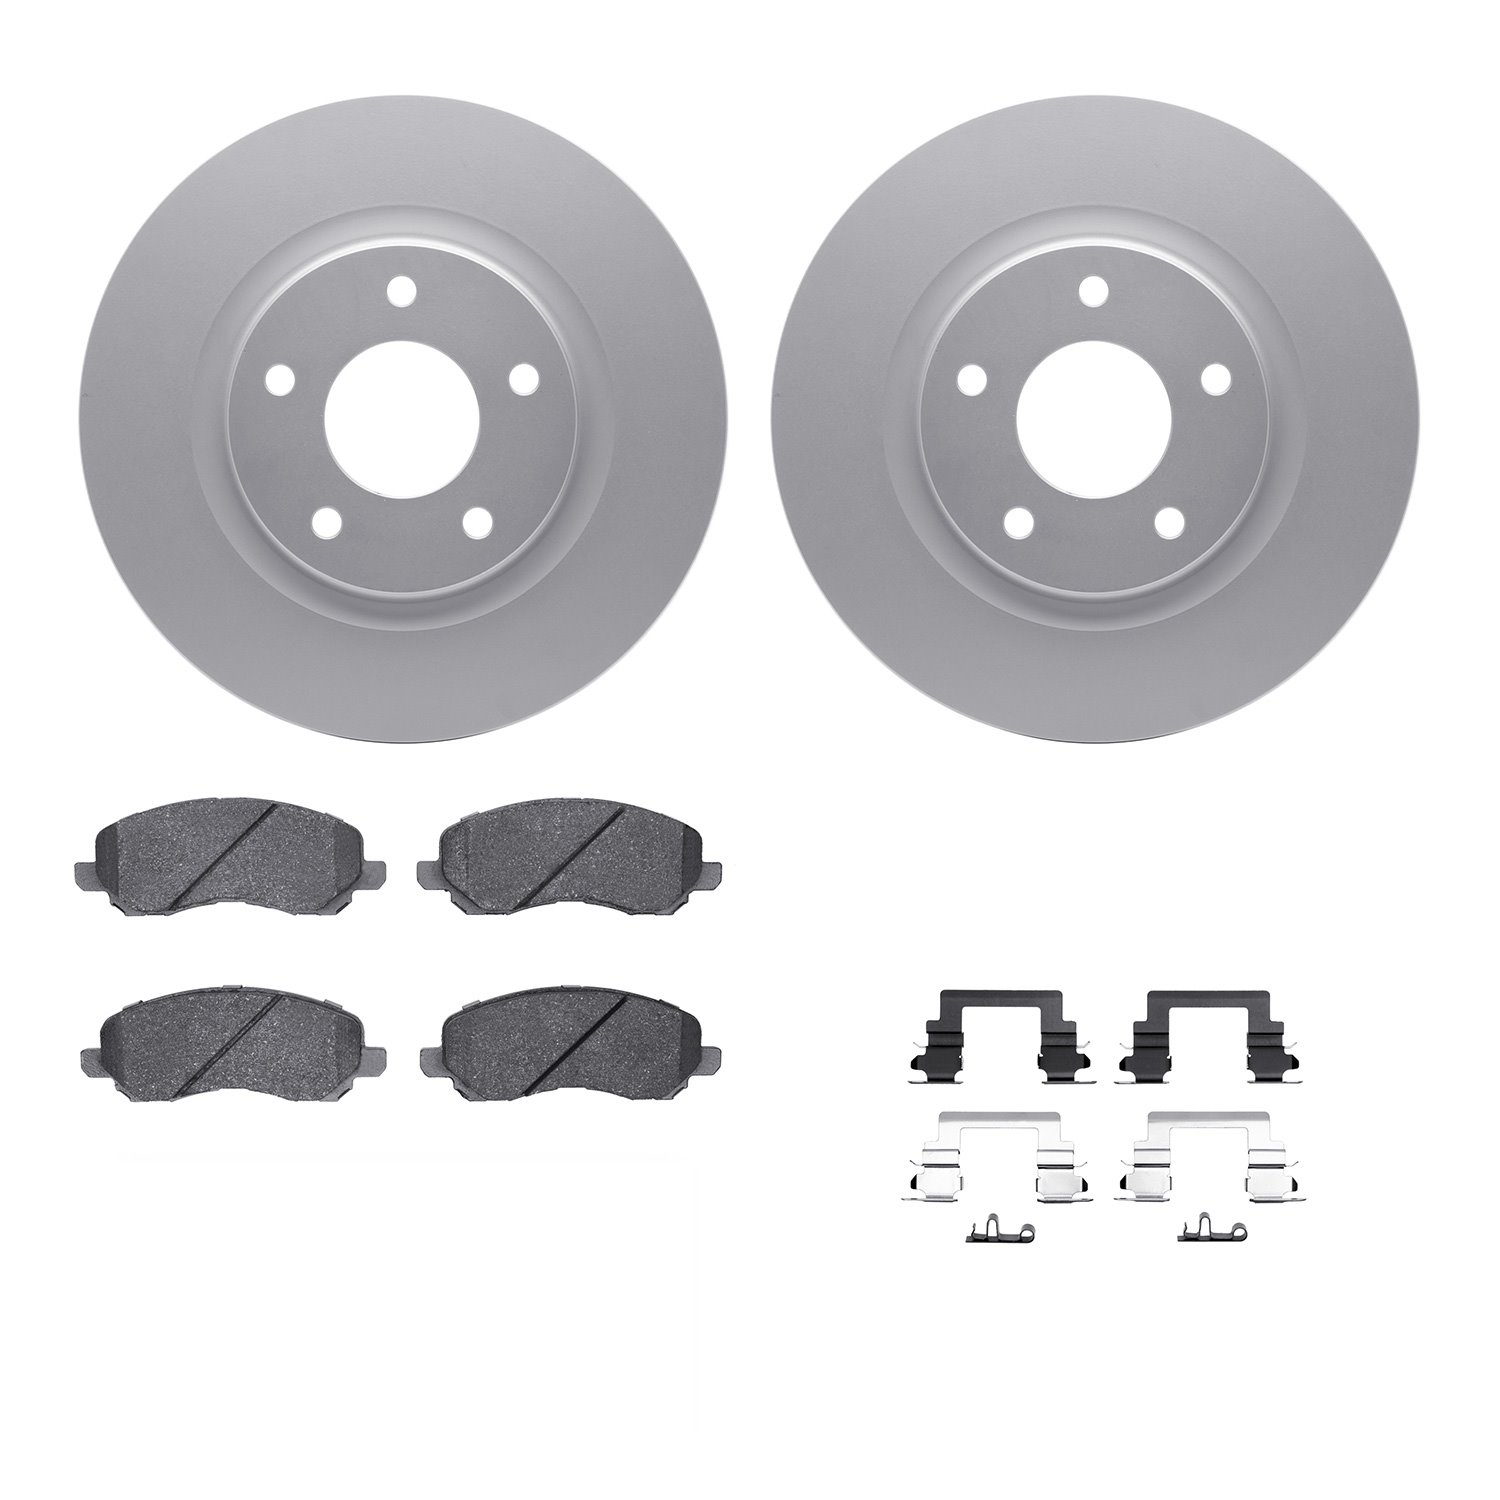 4312-39008 Geospec Brake Rotors with 3000-Series Ceramic Brake Pads & Hardware, Fits Select Multiple Makes/Models, Position: Fro